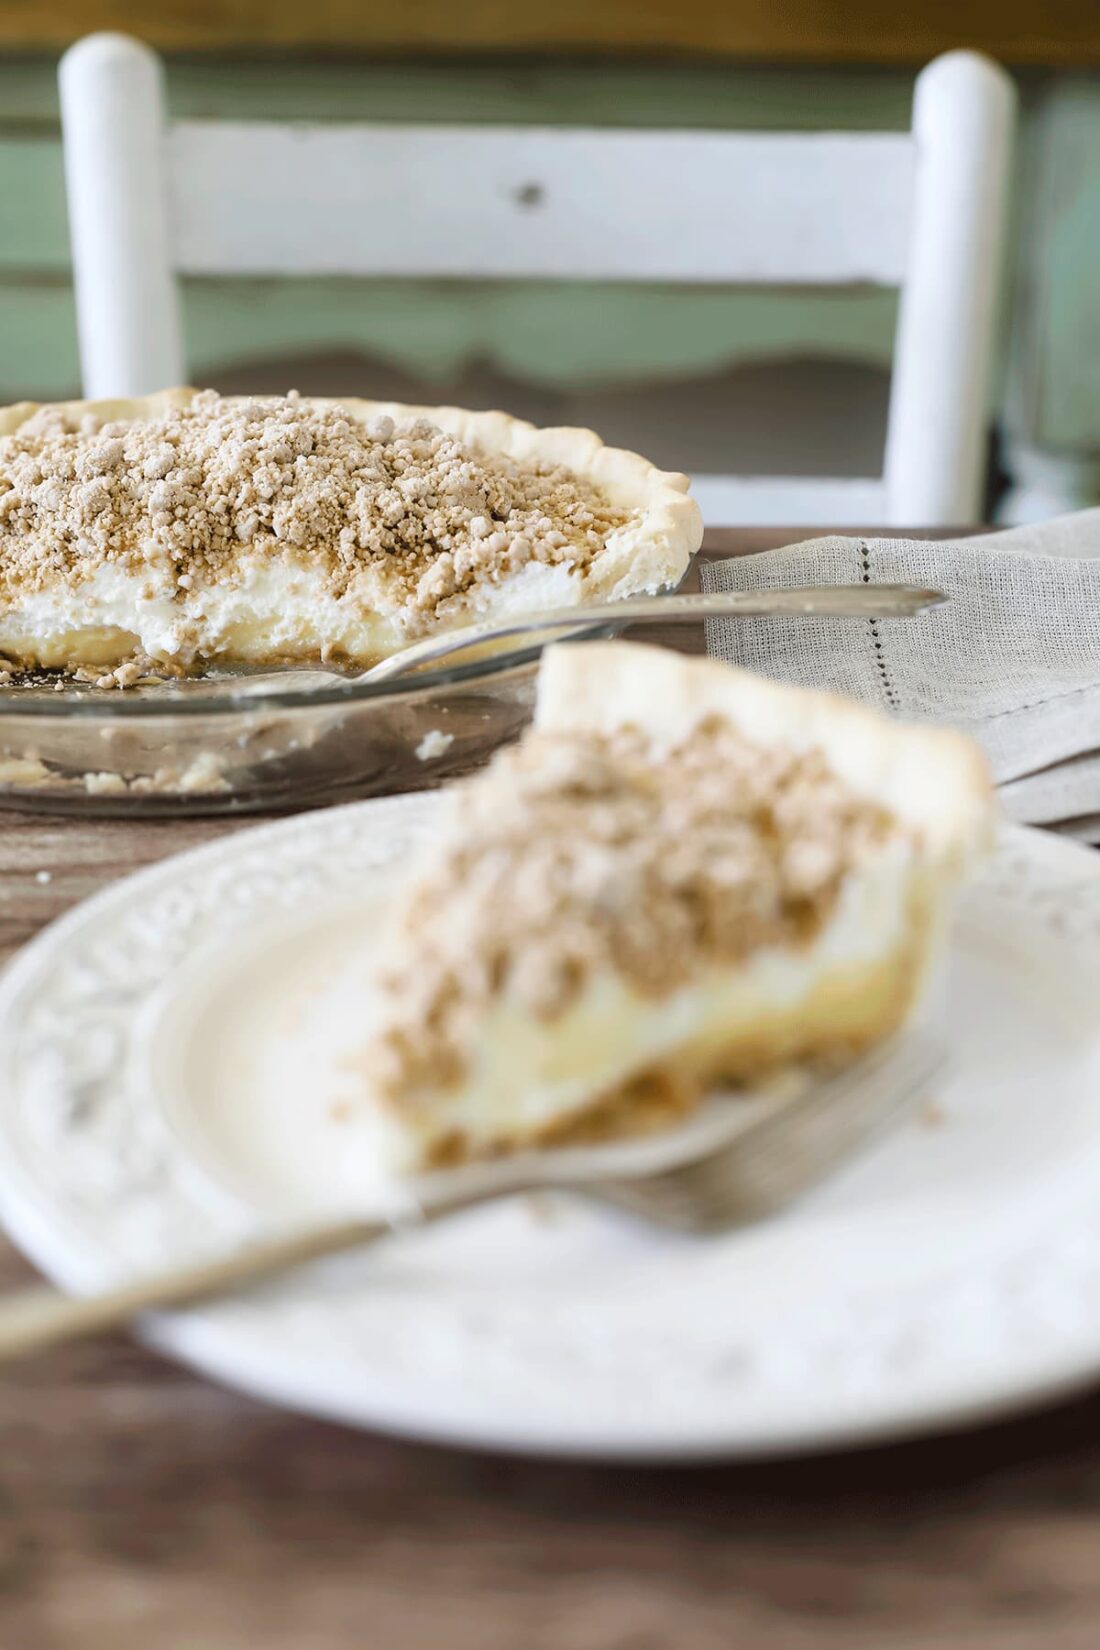 Old Fashioned Peanut Butter Pie and pies server set on a rustic wooden surface.